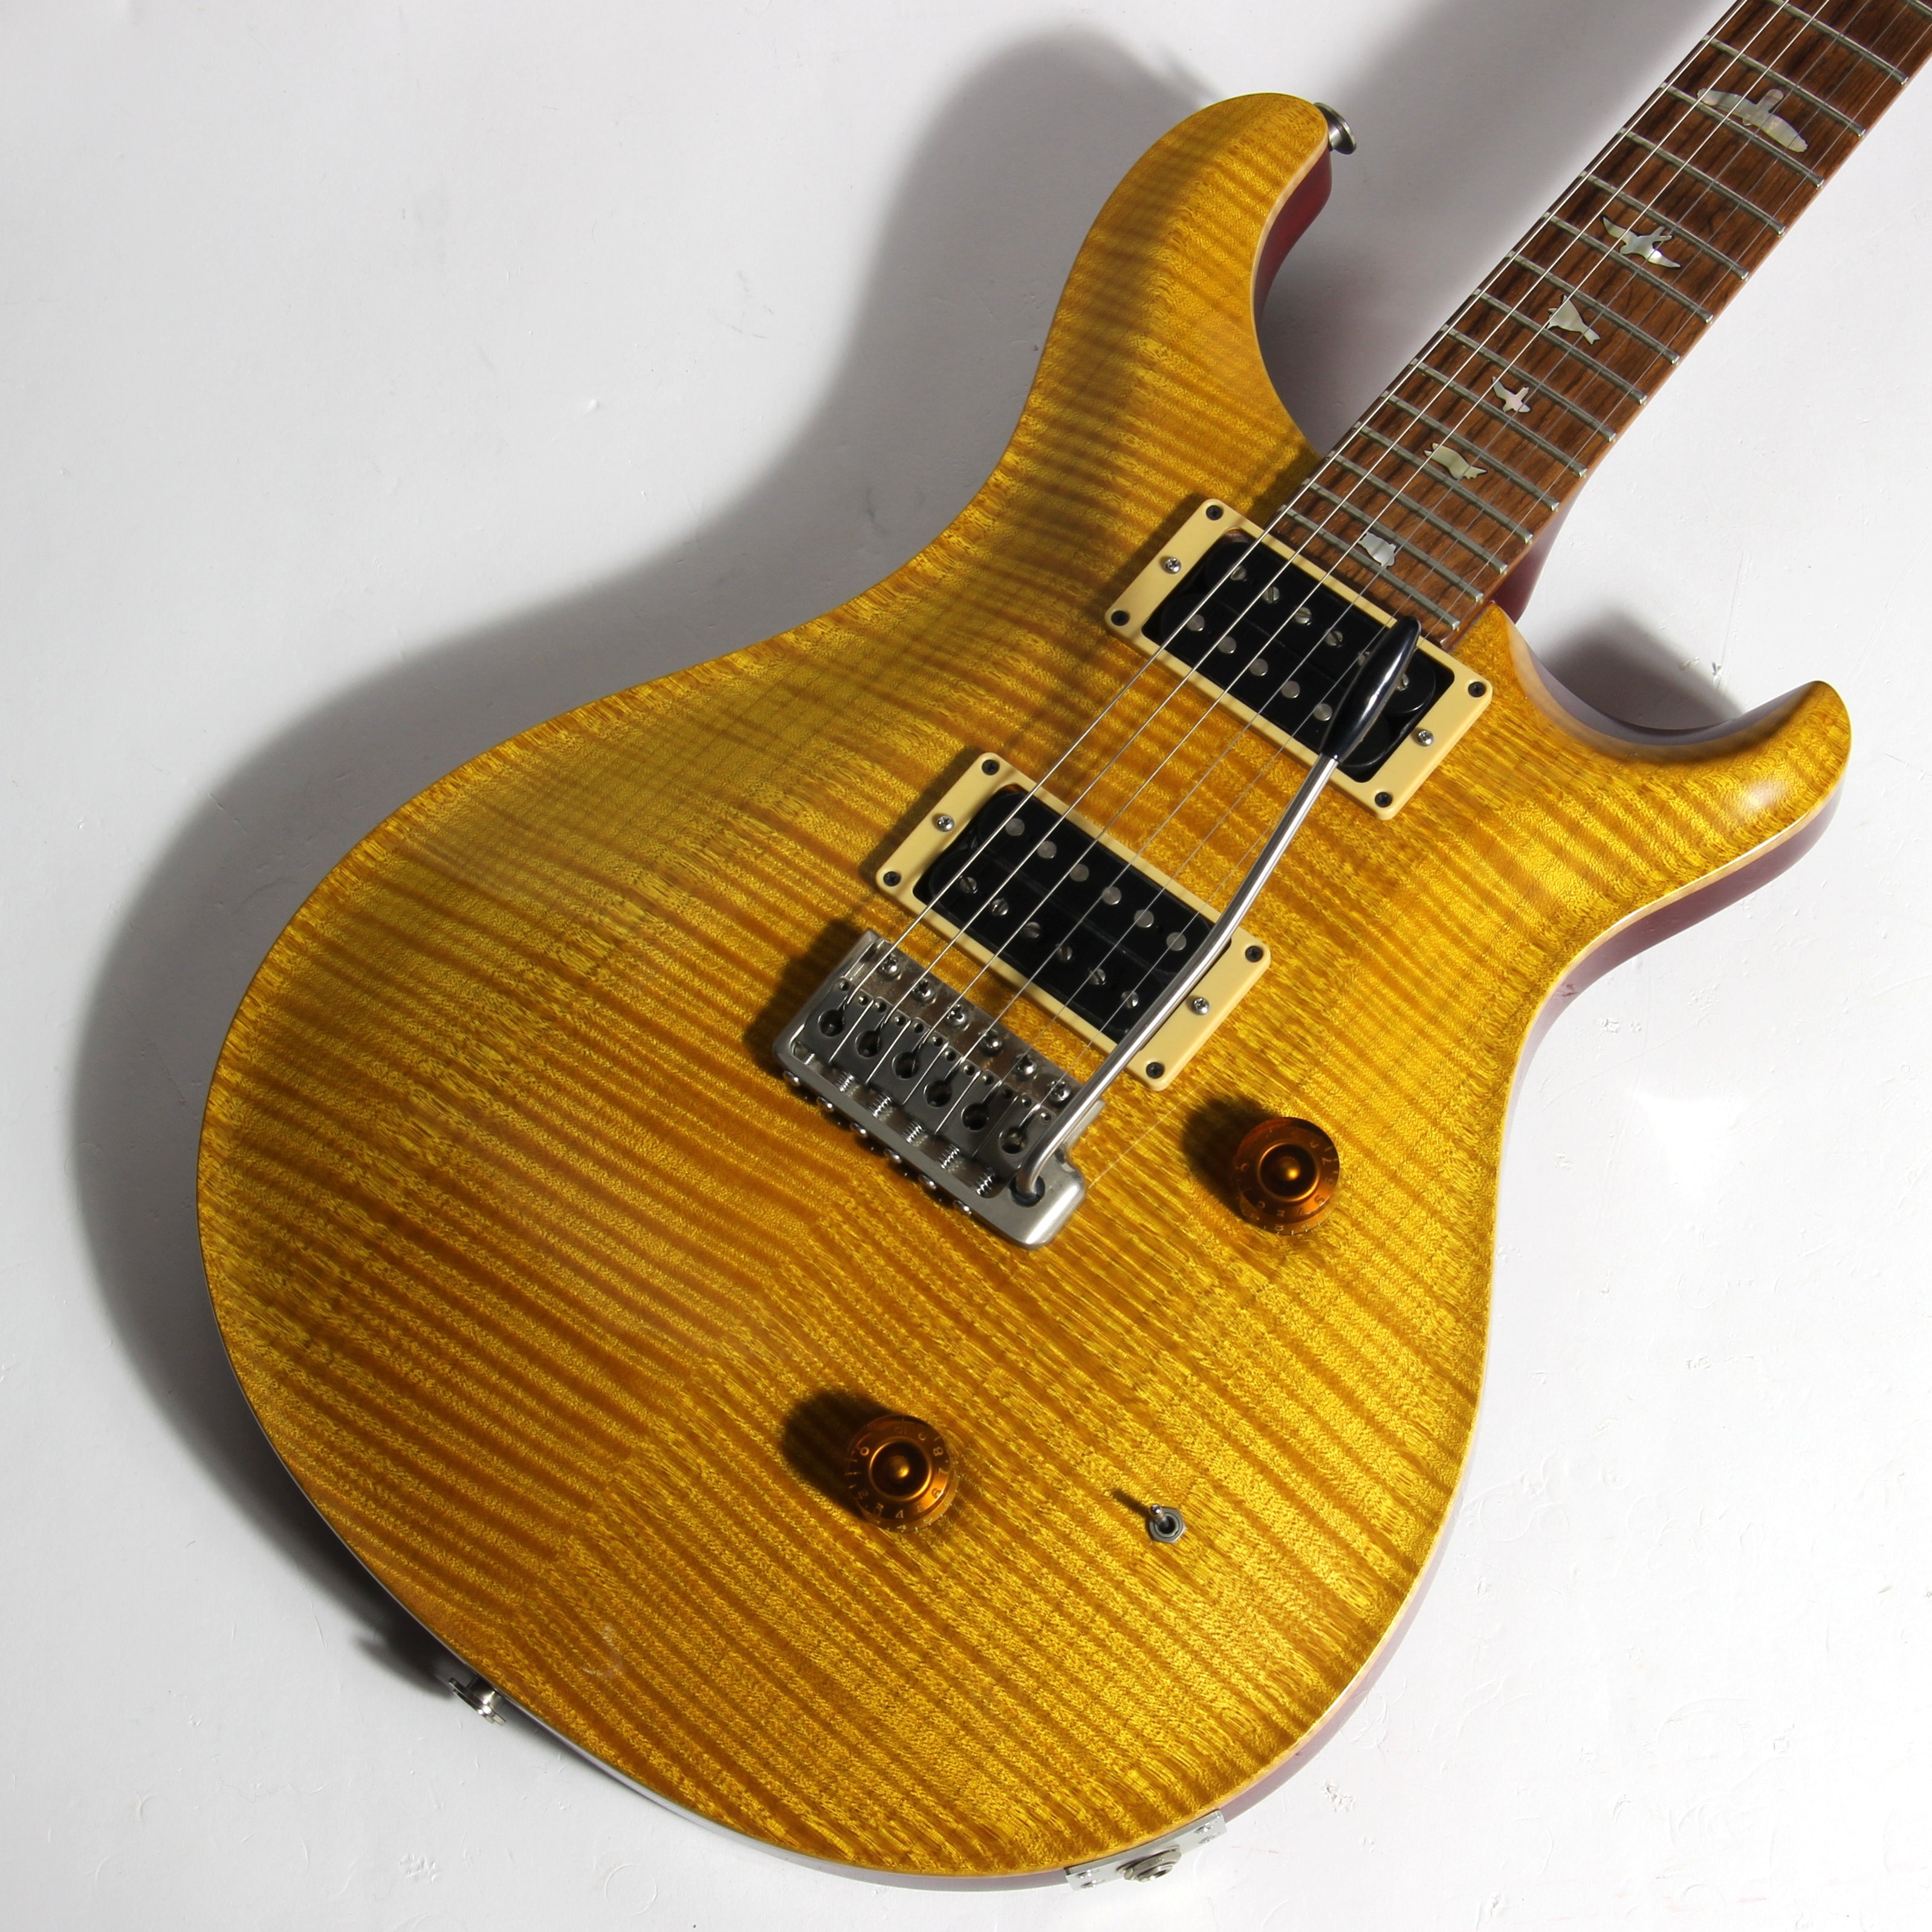 COLLECTORS! 1990 PRS Custom 24 - Vintage Yellow 10-Top Brazilian Rosewood -  RARE Factory Multi-Tap Pickups! 1989 Paul Reed Smith